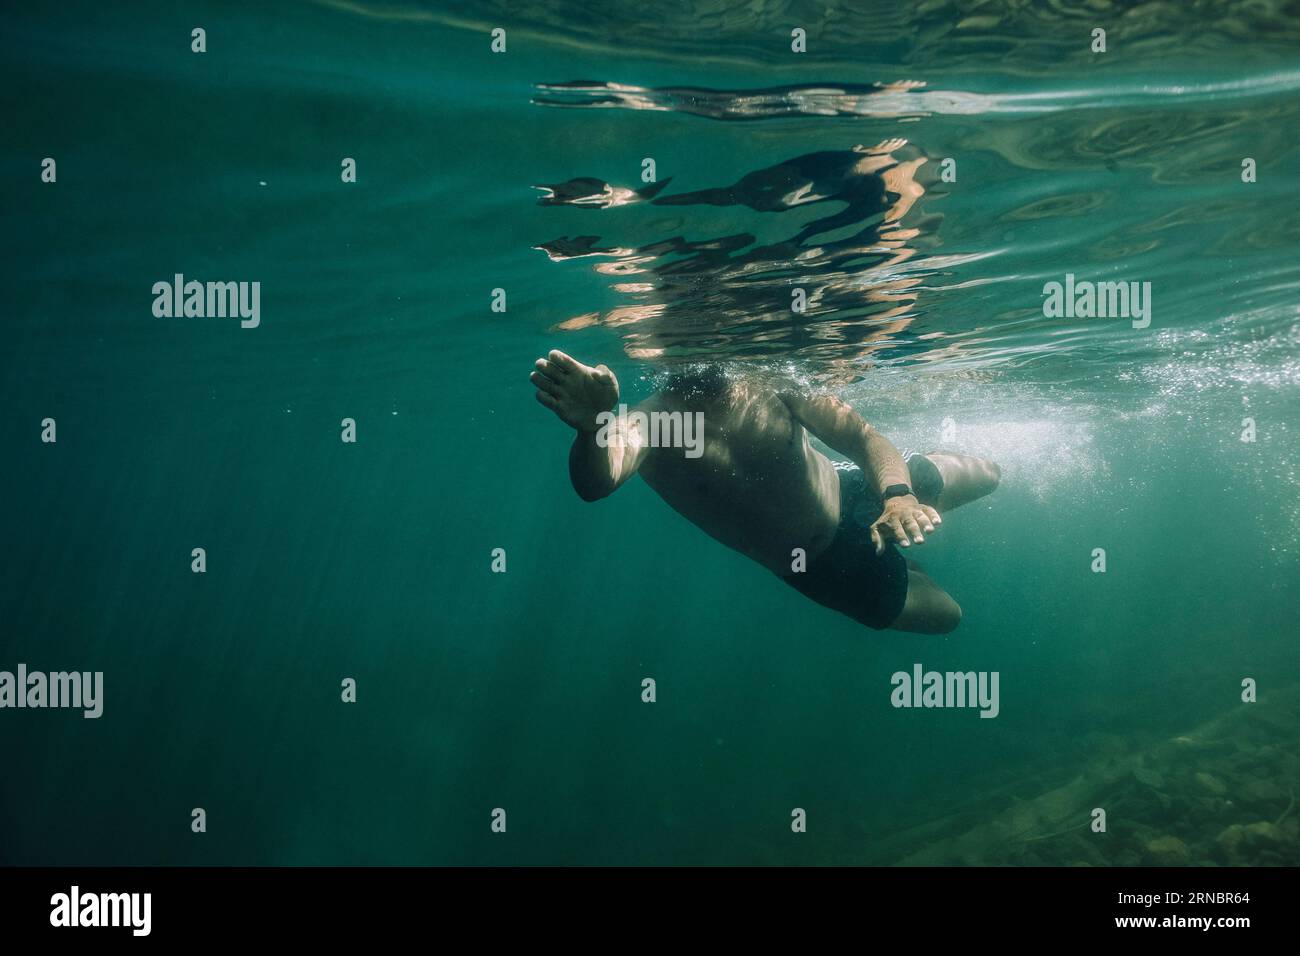 A young hispanic male swims through cold, blue water. Stock Photo